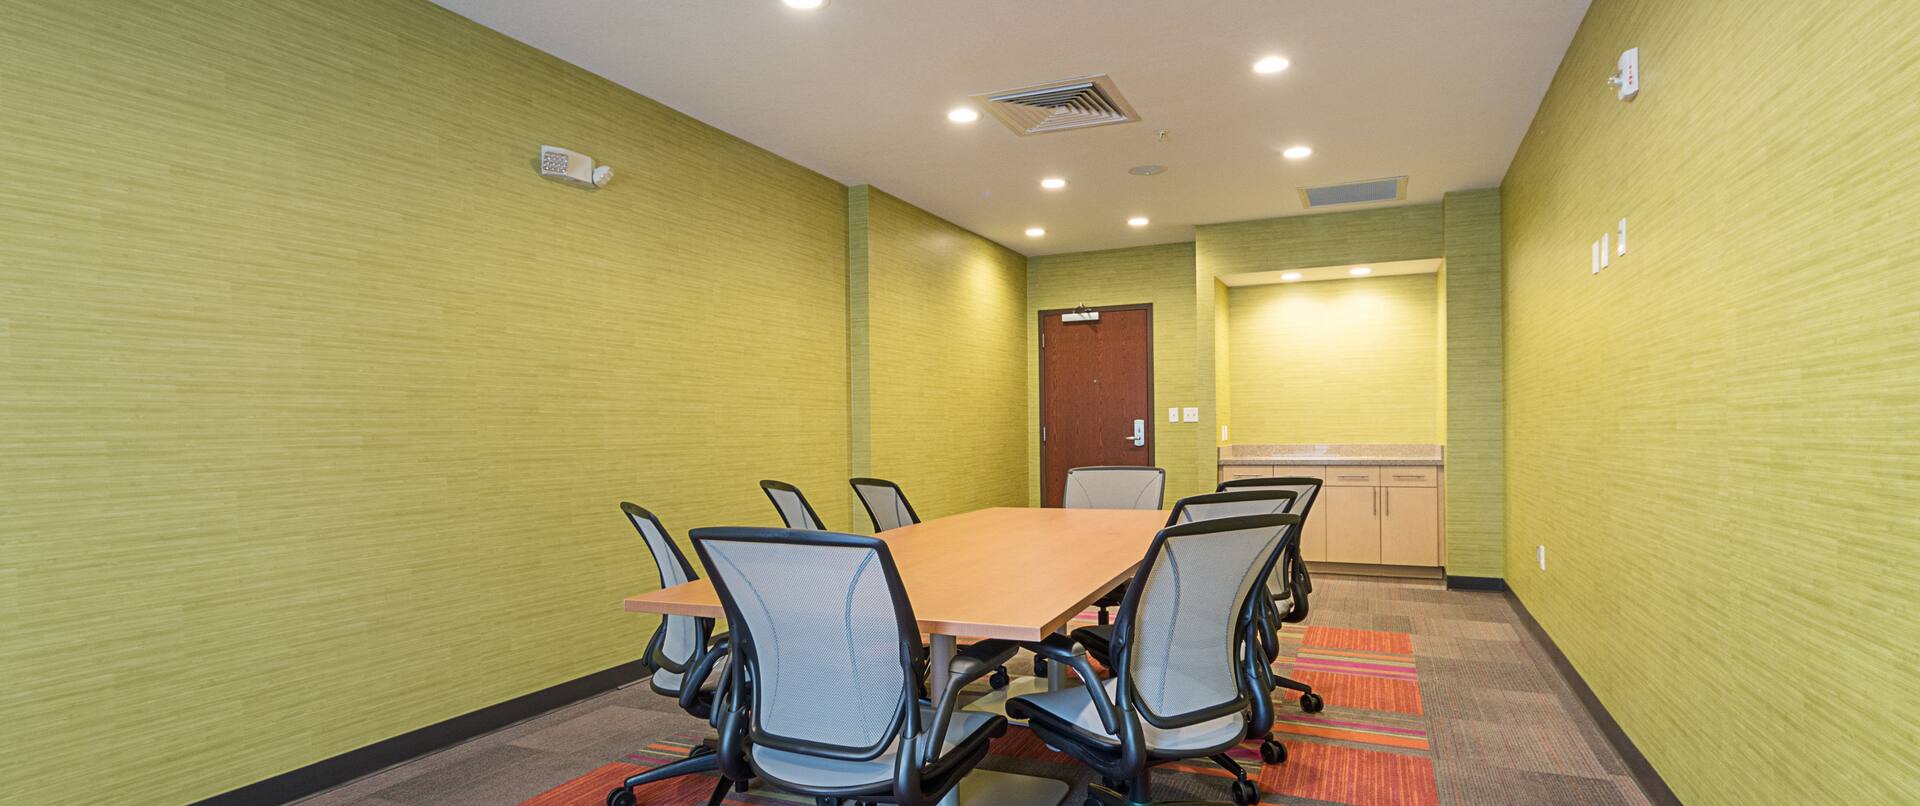 Boardroom Table With Seating for 8 in Green Room Meeting Room